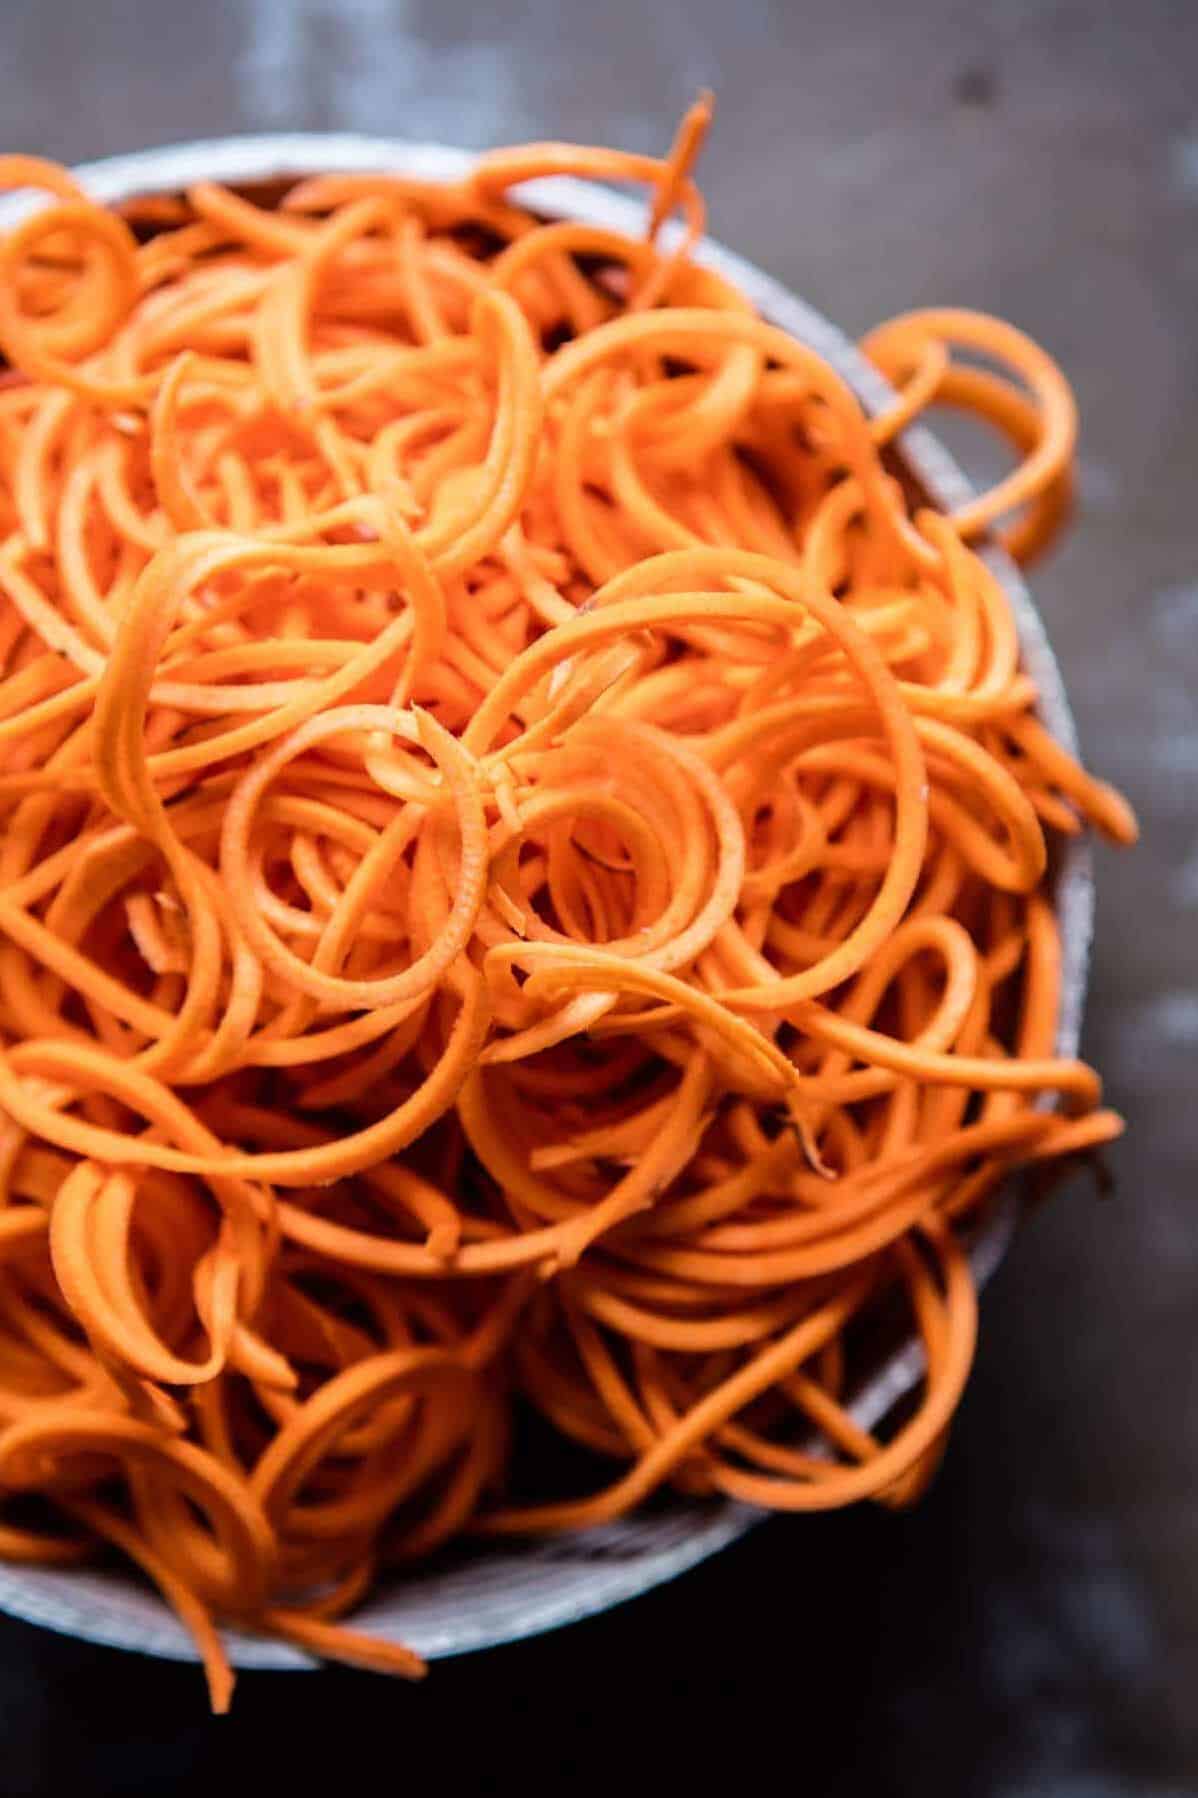  Sweet potato noodles ready for cooking